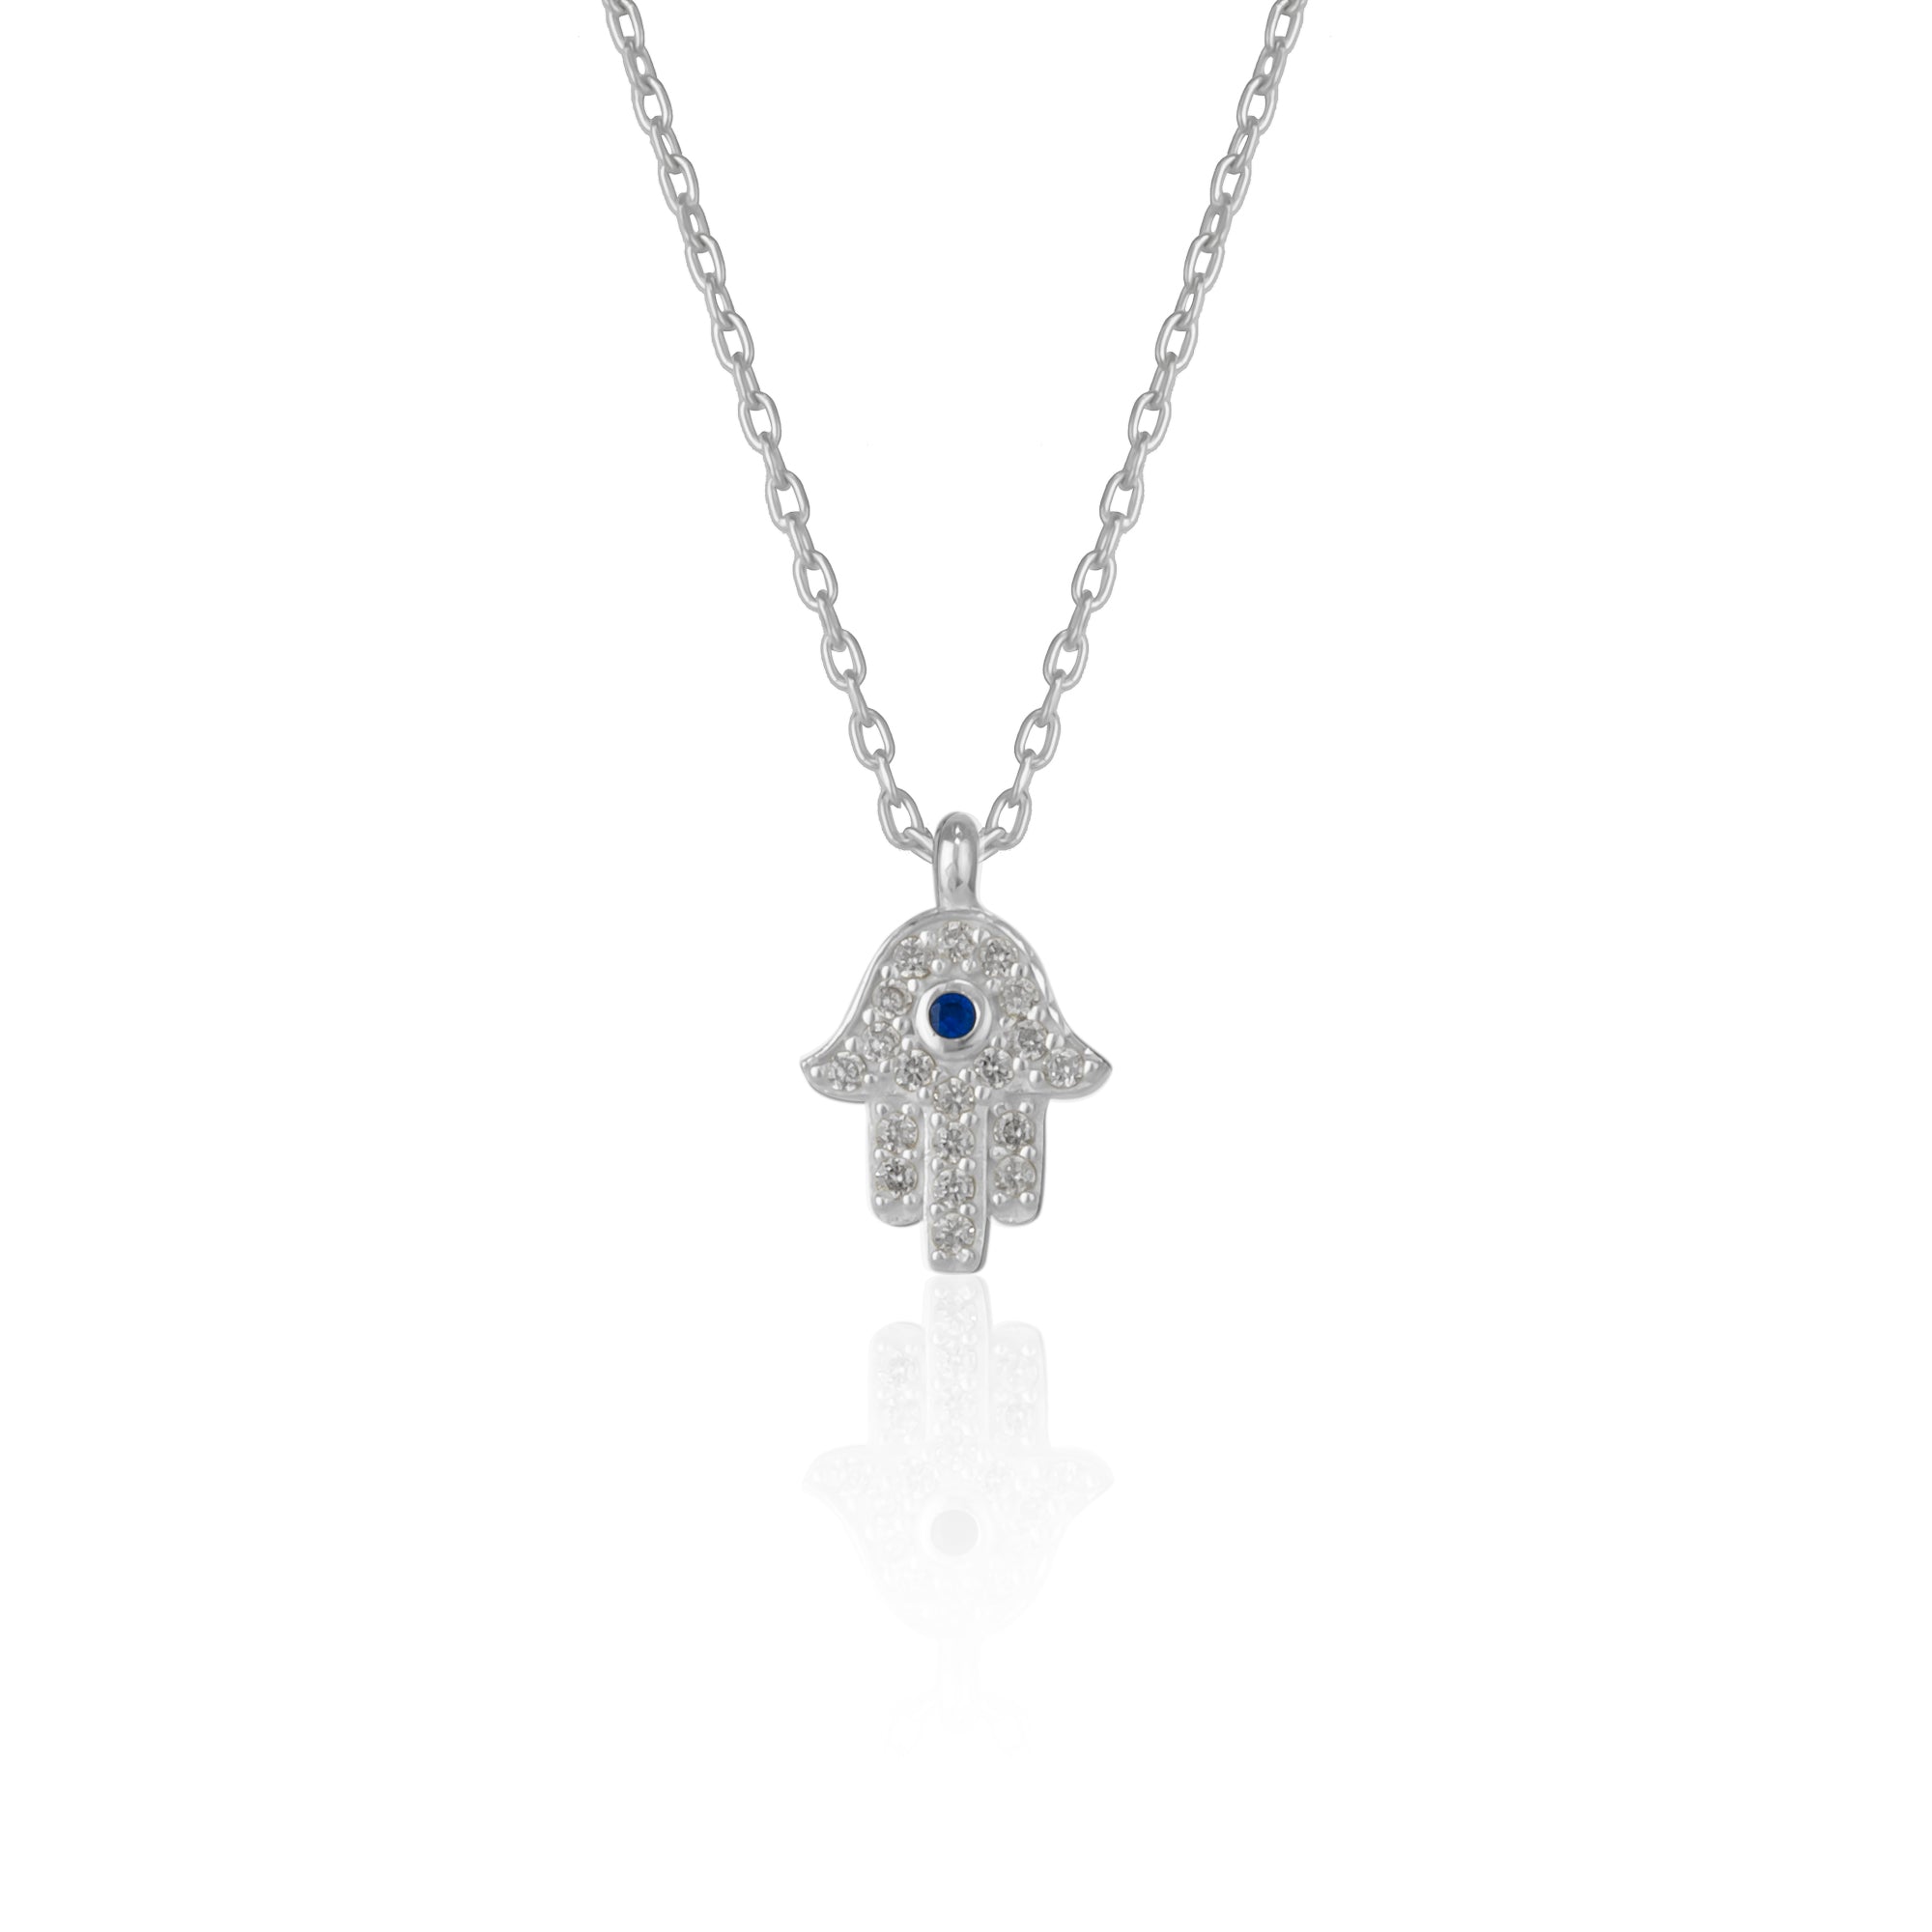 Hamsa Hand Necklace Sterling Silver With Blue Stone